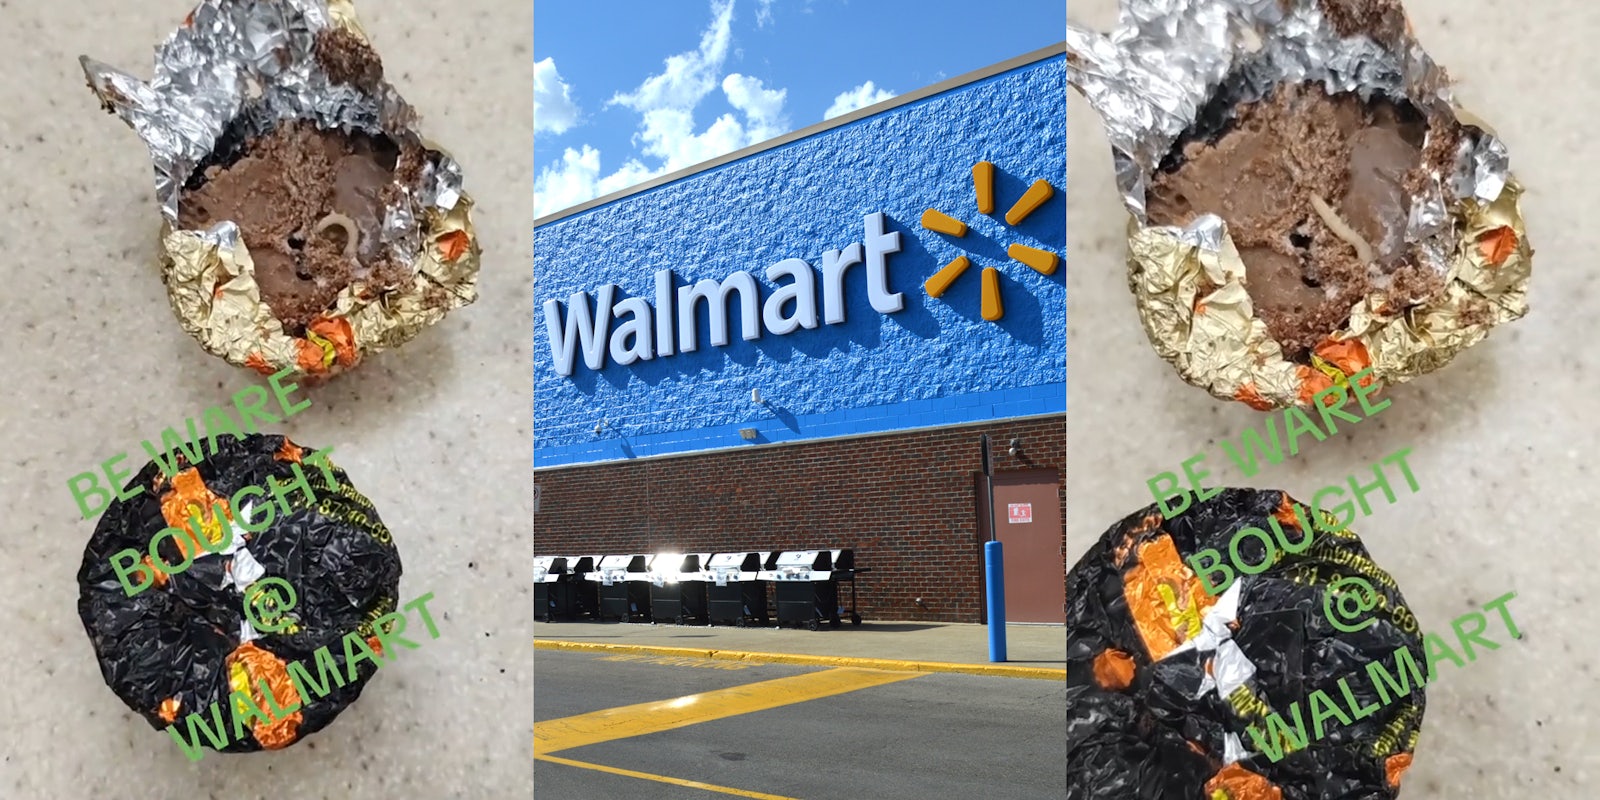 Reese's cups with worm with caption 'BEWARE BOUGHT @ WALMART' (l) Walmart building with sign (c) Reese's cups with worm with caption 'BEWARE BOUGHT @ WALMART' (r)